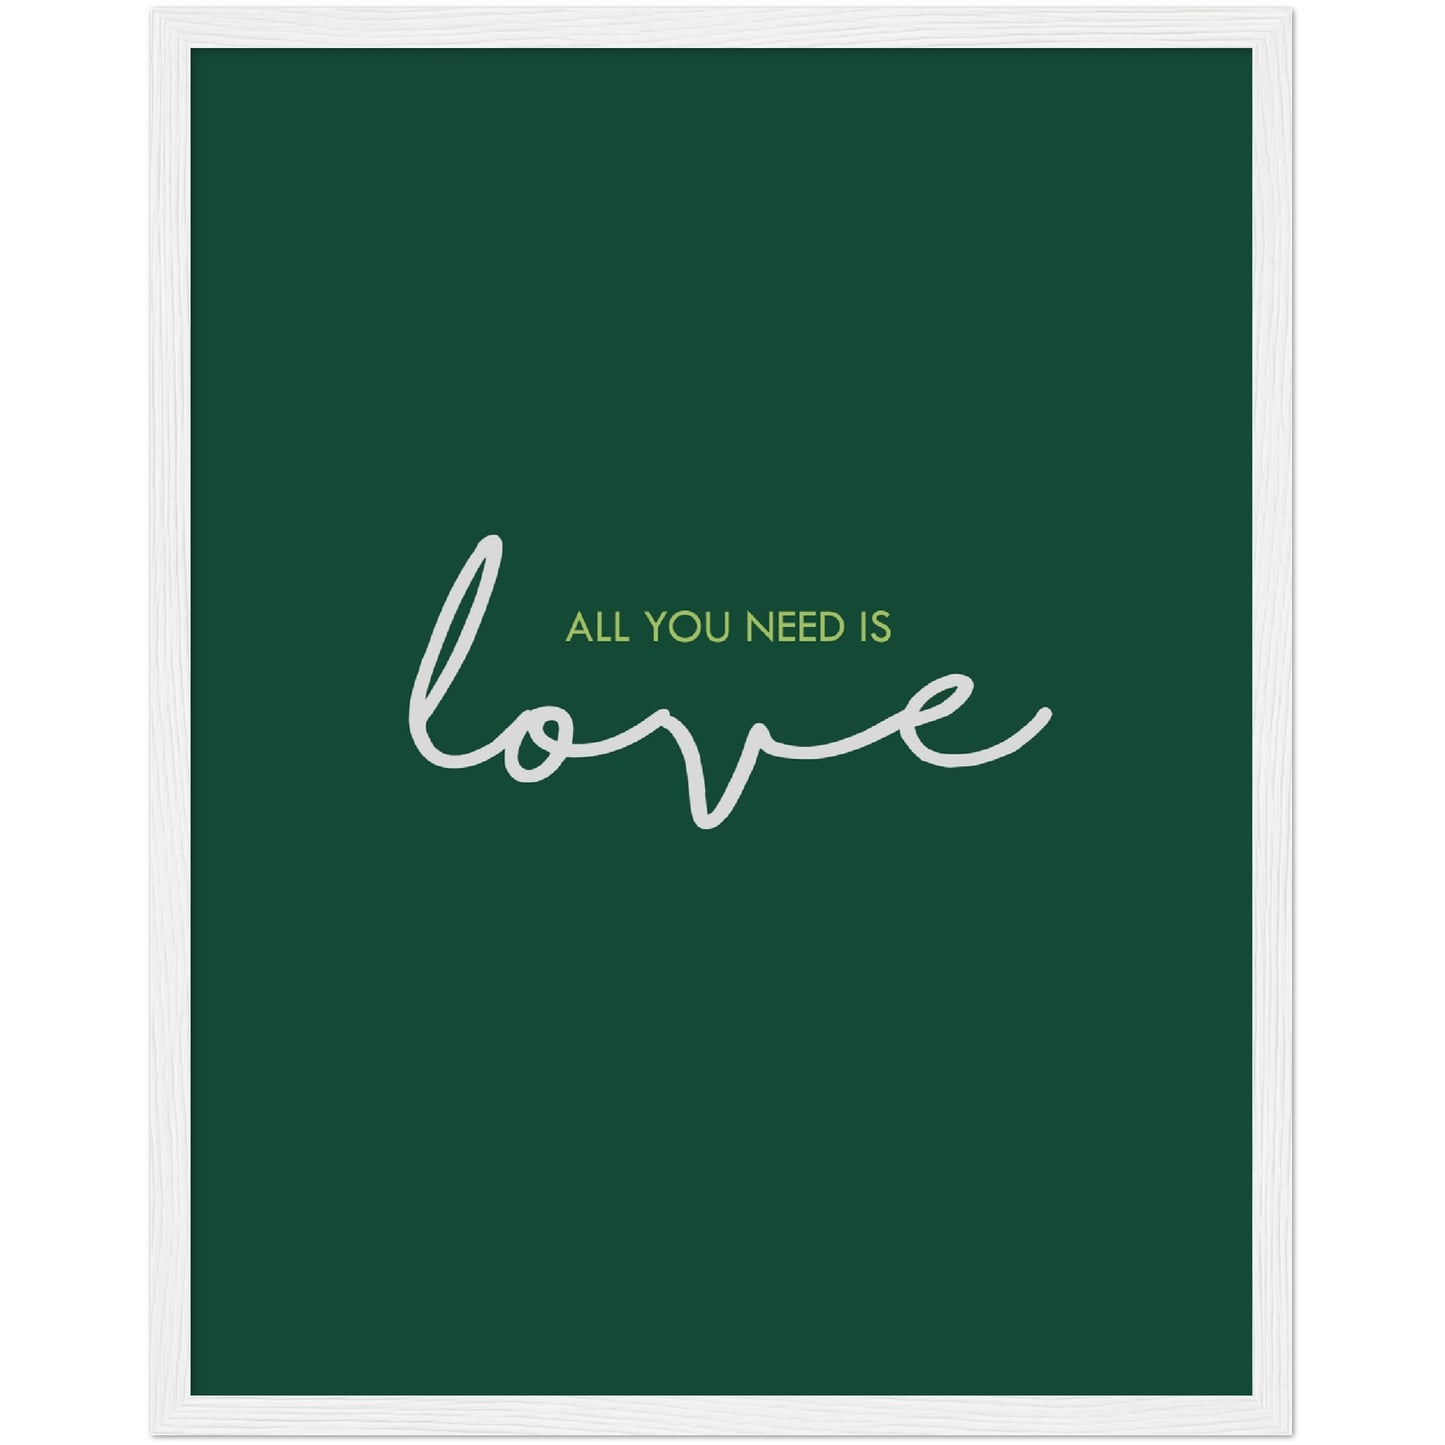 All You Need Is Love Print